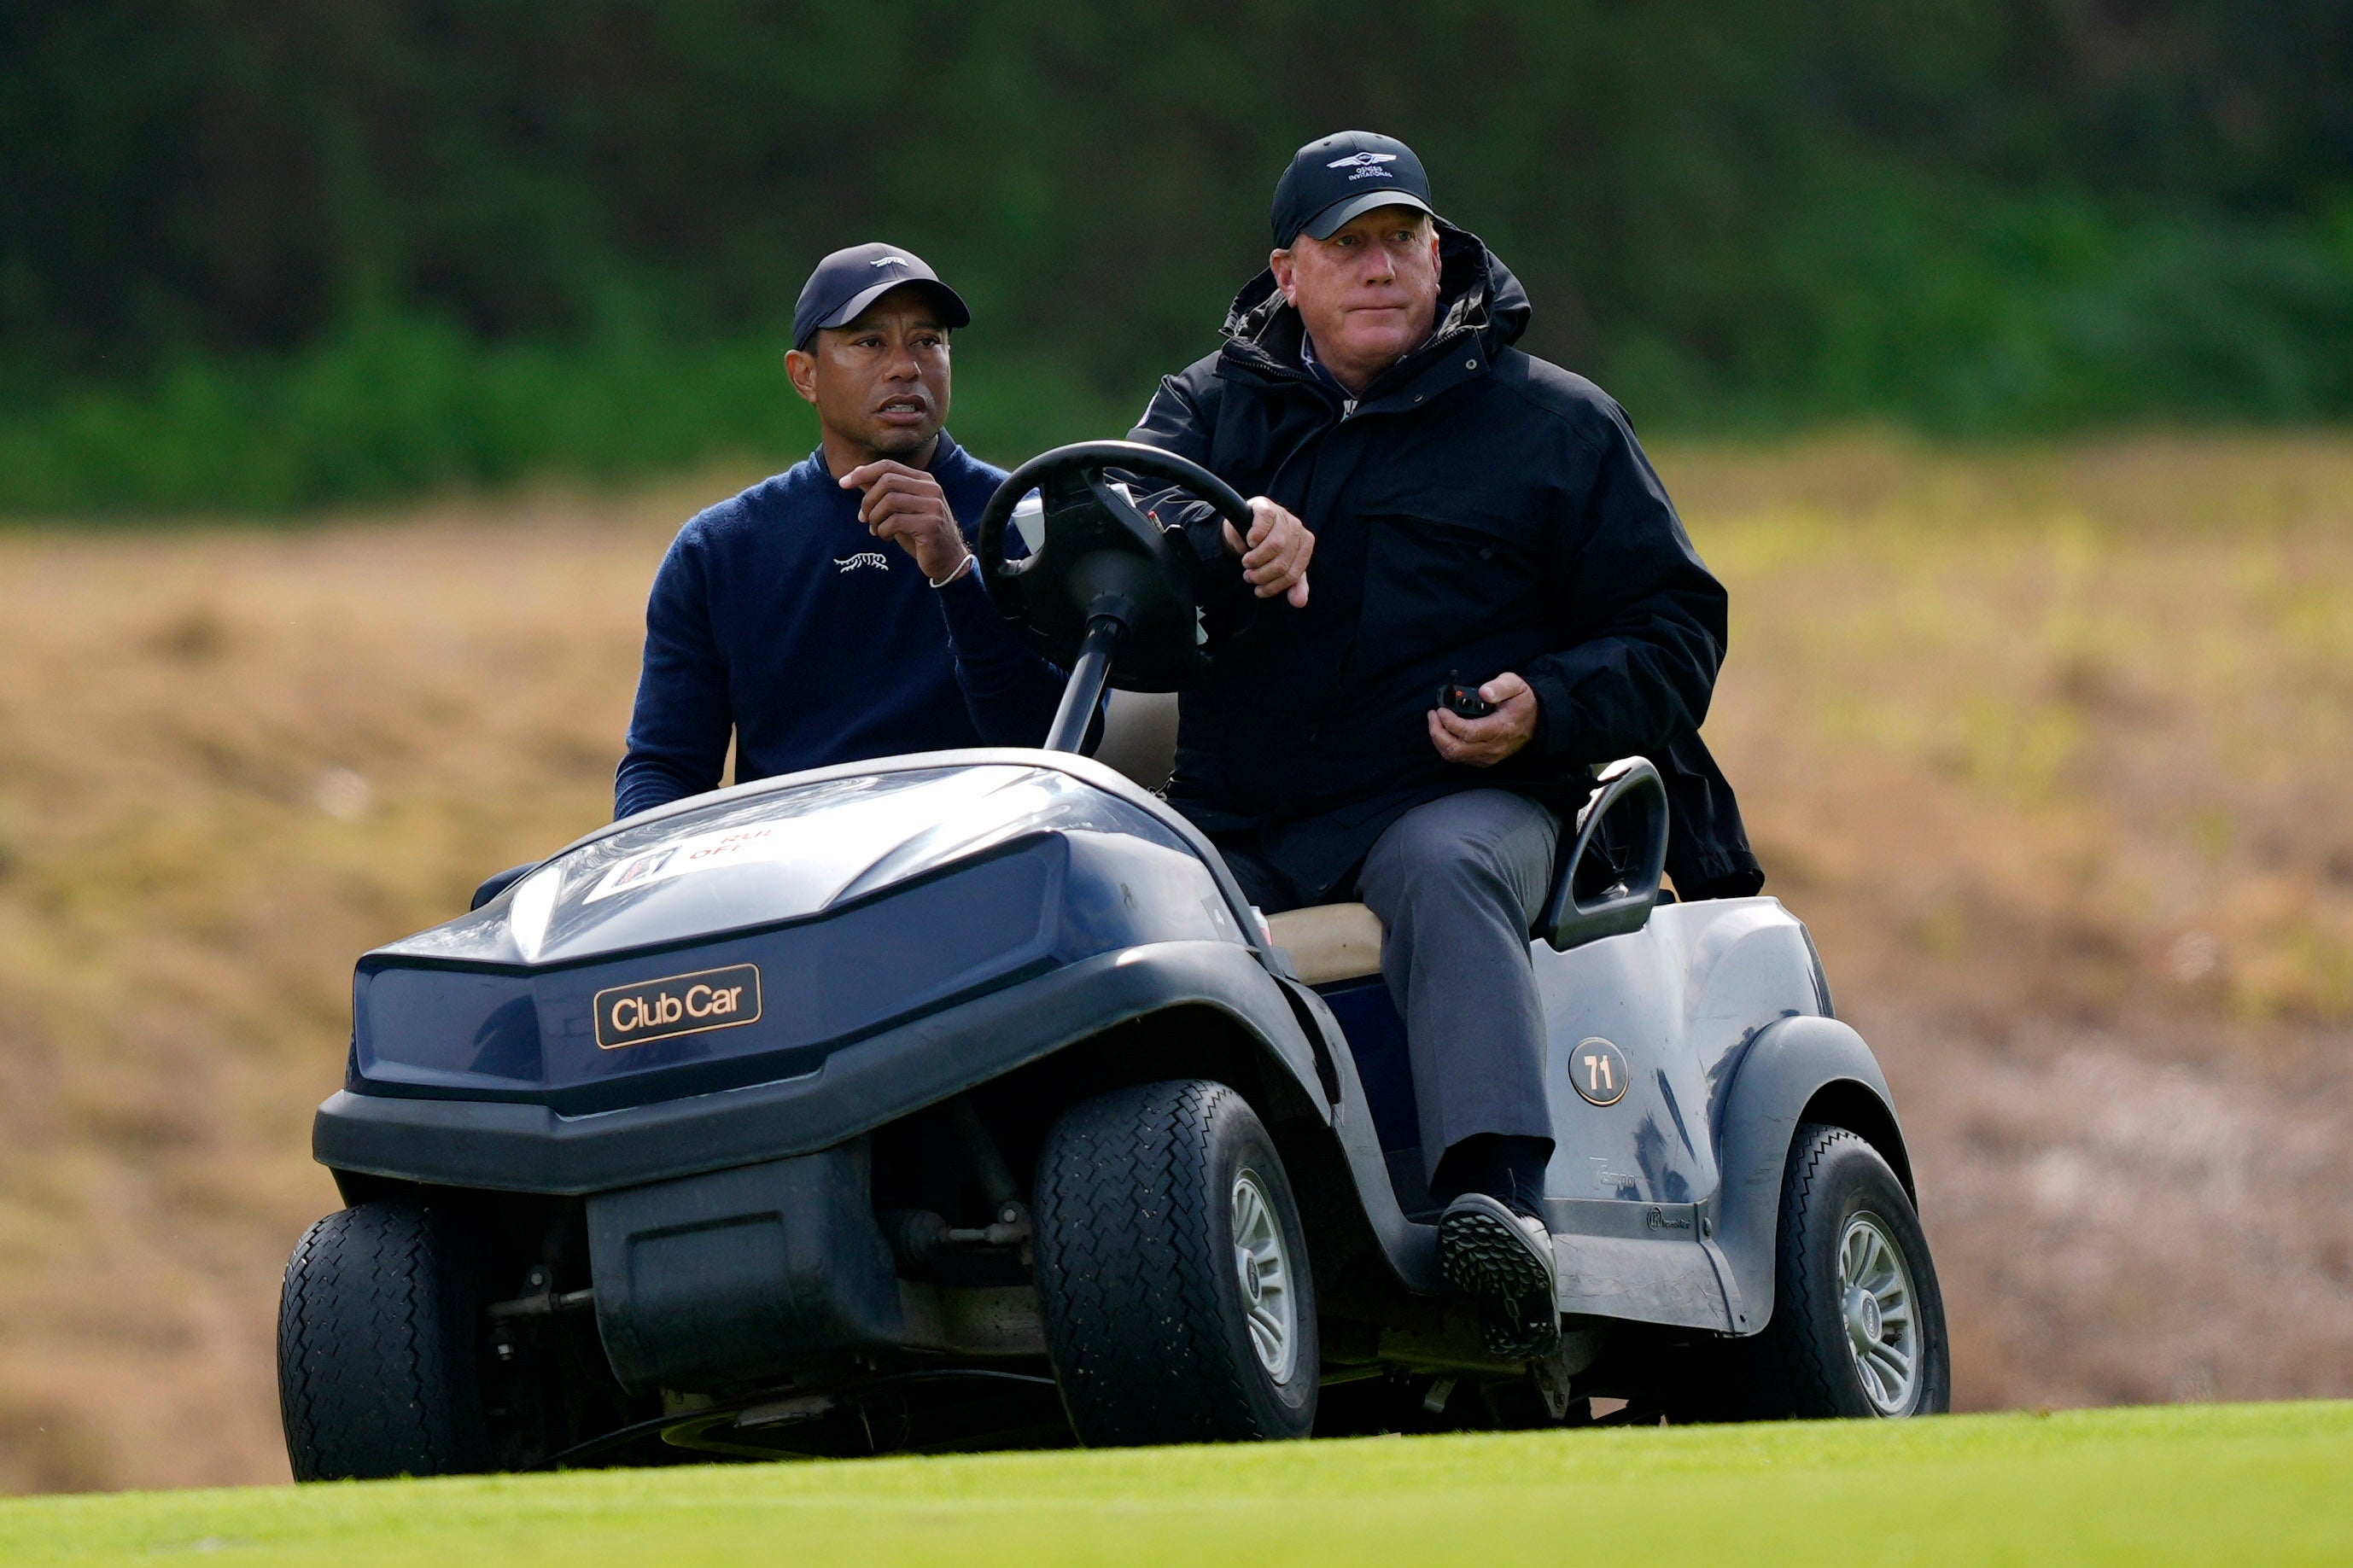 Tiger Woods was driven off the course after withdrawing from the tournament